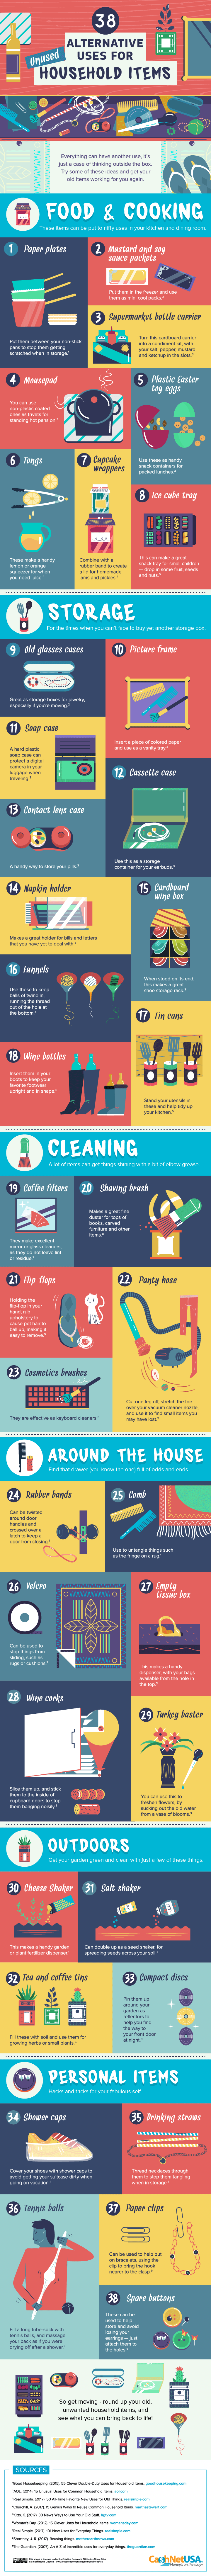 38 Alternative Uses for Unused Household Items (infographic)